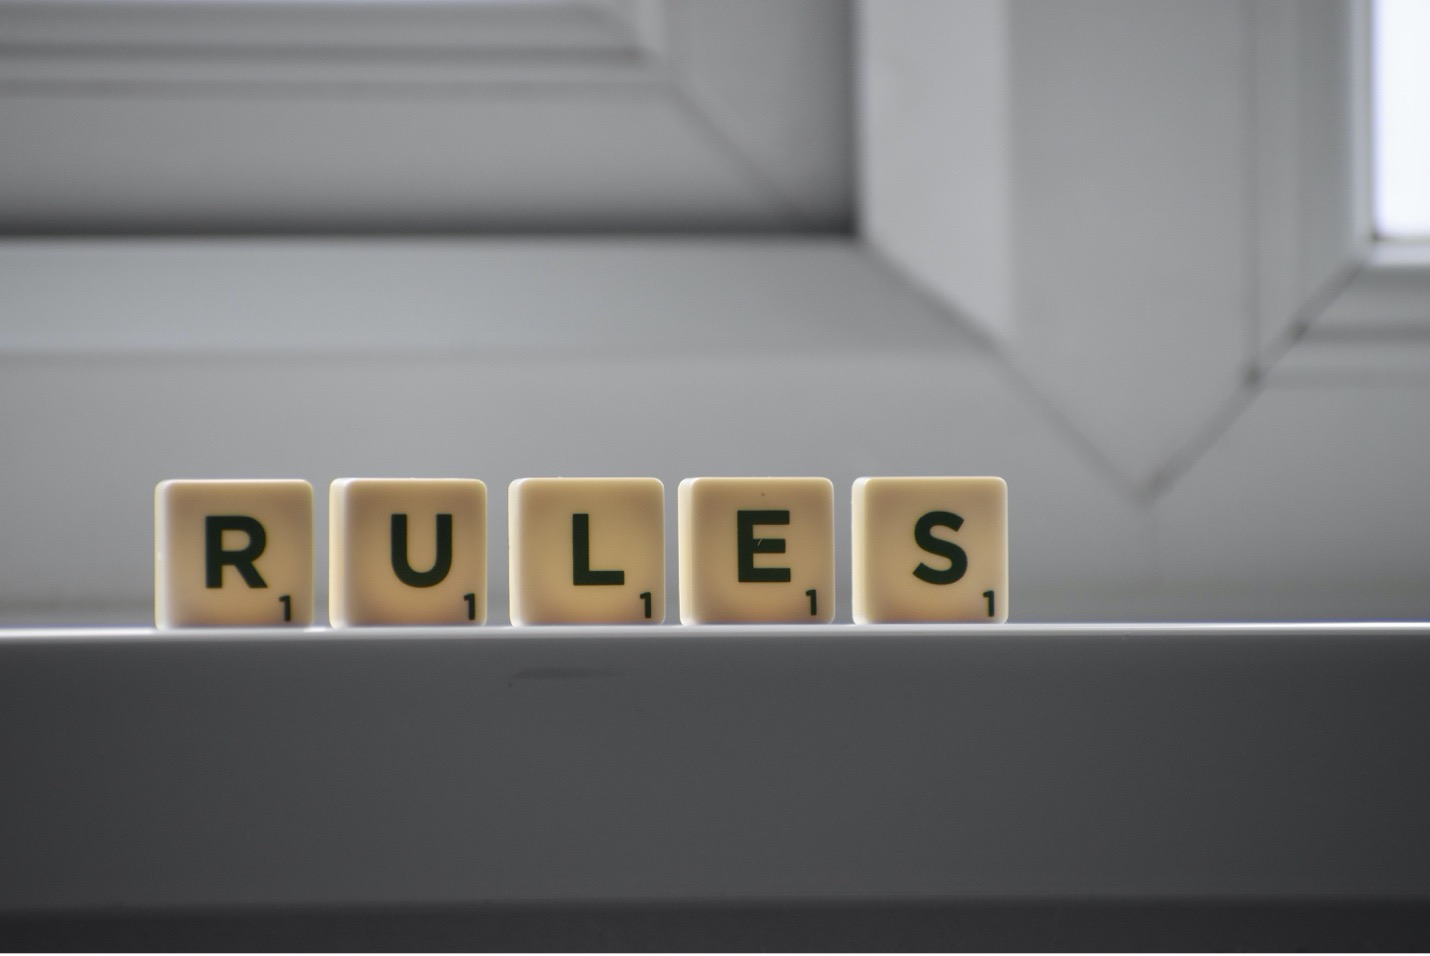 'Rules' spelled out with blocks